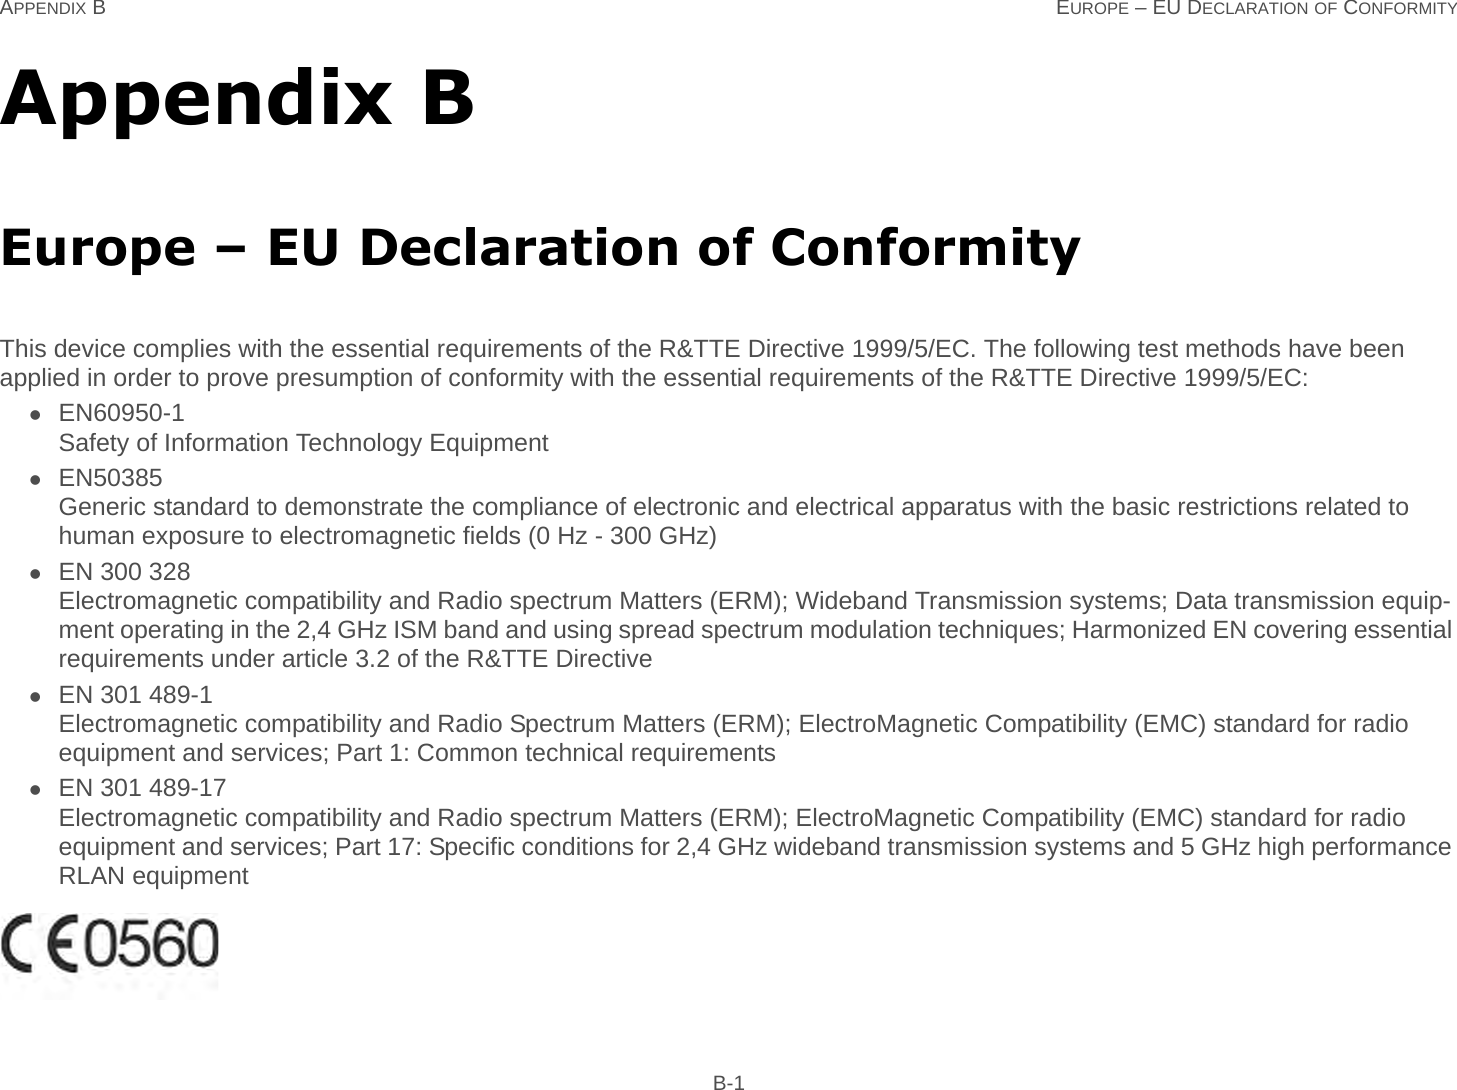 APPENDIX B EUROPE – EU DECLARATION OF CONFORMITY B-1Appendix BEurope – EU Declaration of ConformityThis device complies with the essential requirements of the R&amp;TTE Directive 1999/5/EC. The following test methods have been applied in order to prove presumption of conformity with the essential requirements of the R&amp;TTE Directive 1999/5/EC:EN60950-1Safety of Information Technology EquipmentEN50385 Generic standard to demonstrate the compliance of electronic and electrical apparatus with the basic restrictions related to human exposure to electromagnetic fields (0 Hz - 300 GHz)EN 300 328 Electromagnetic compatibility and Radio spectrum Matters (ERM); Wideband Transmission systems; Data transmission equip-ment operating in the 2,4 GHz ISM band and using spread spectrum modulation techniques; Harmonized EN covering essential requirements under article 3.2 of the R&amp;TTE DirectiveEN 301 489-1Electromagnetic compatibility and Radio Spectrum Matters (ERM); ElectroMagnetic Compatibility (EMC) standard for radio equipment and services; Part 1: Common technical requirementsEN 301 489-17Electromagnetic compatibility and Radio spectrum Matters (ERM); ElectroMagnetic Compatibility (EMC) standard for radio equipment and services; Part 17: Specific conditions for 2,4 GHz wideband transmission systems and 5 GHz high performance RLAN equipment